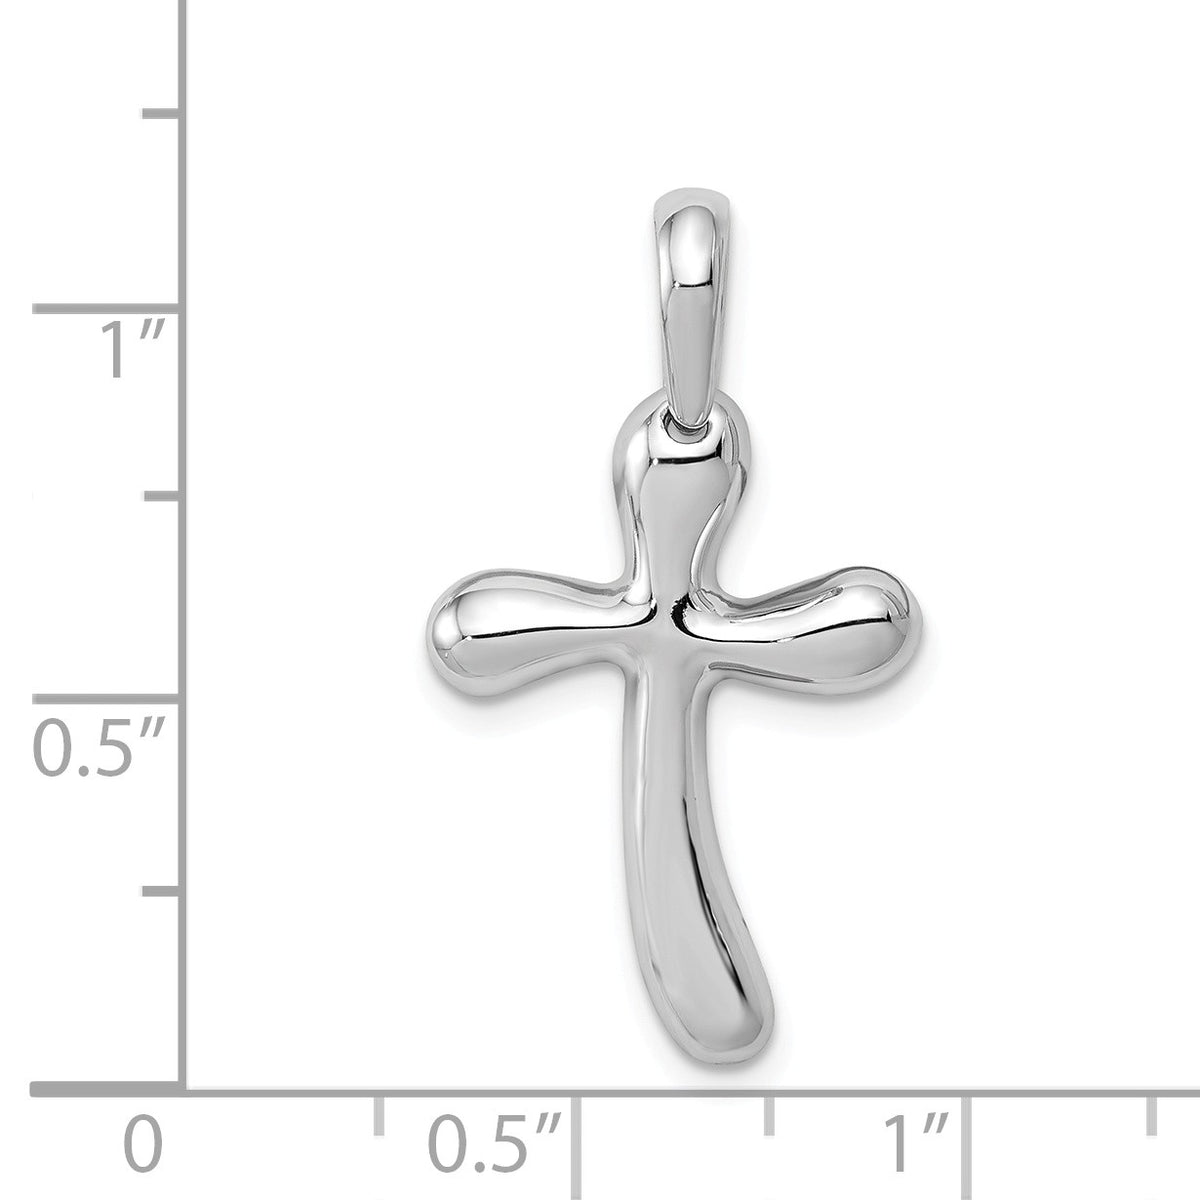 Alternate view of the 14k White Gold Polished Freeform Cross Pendant by The Black Bow Jewelry Co.